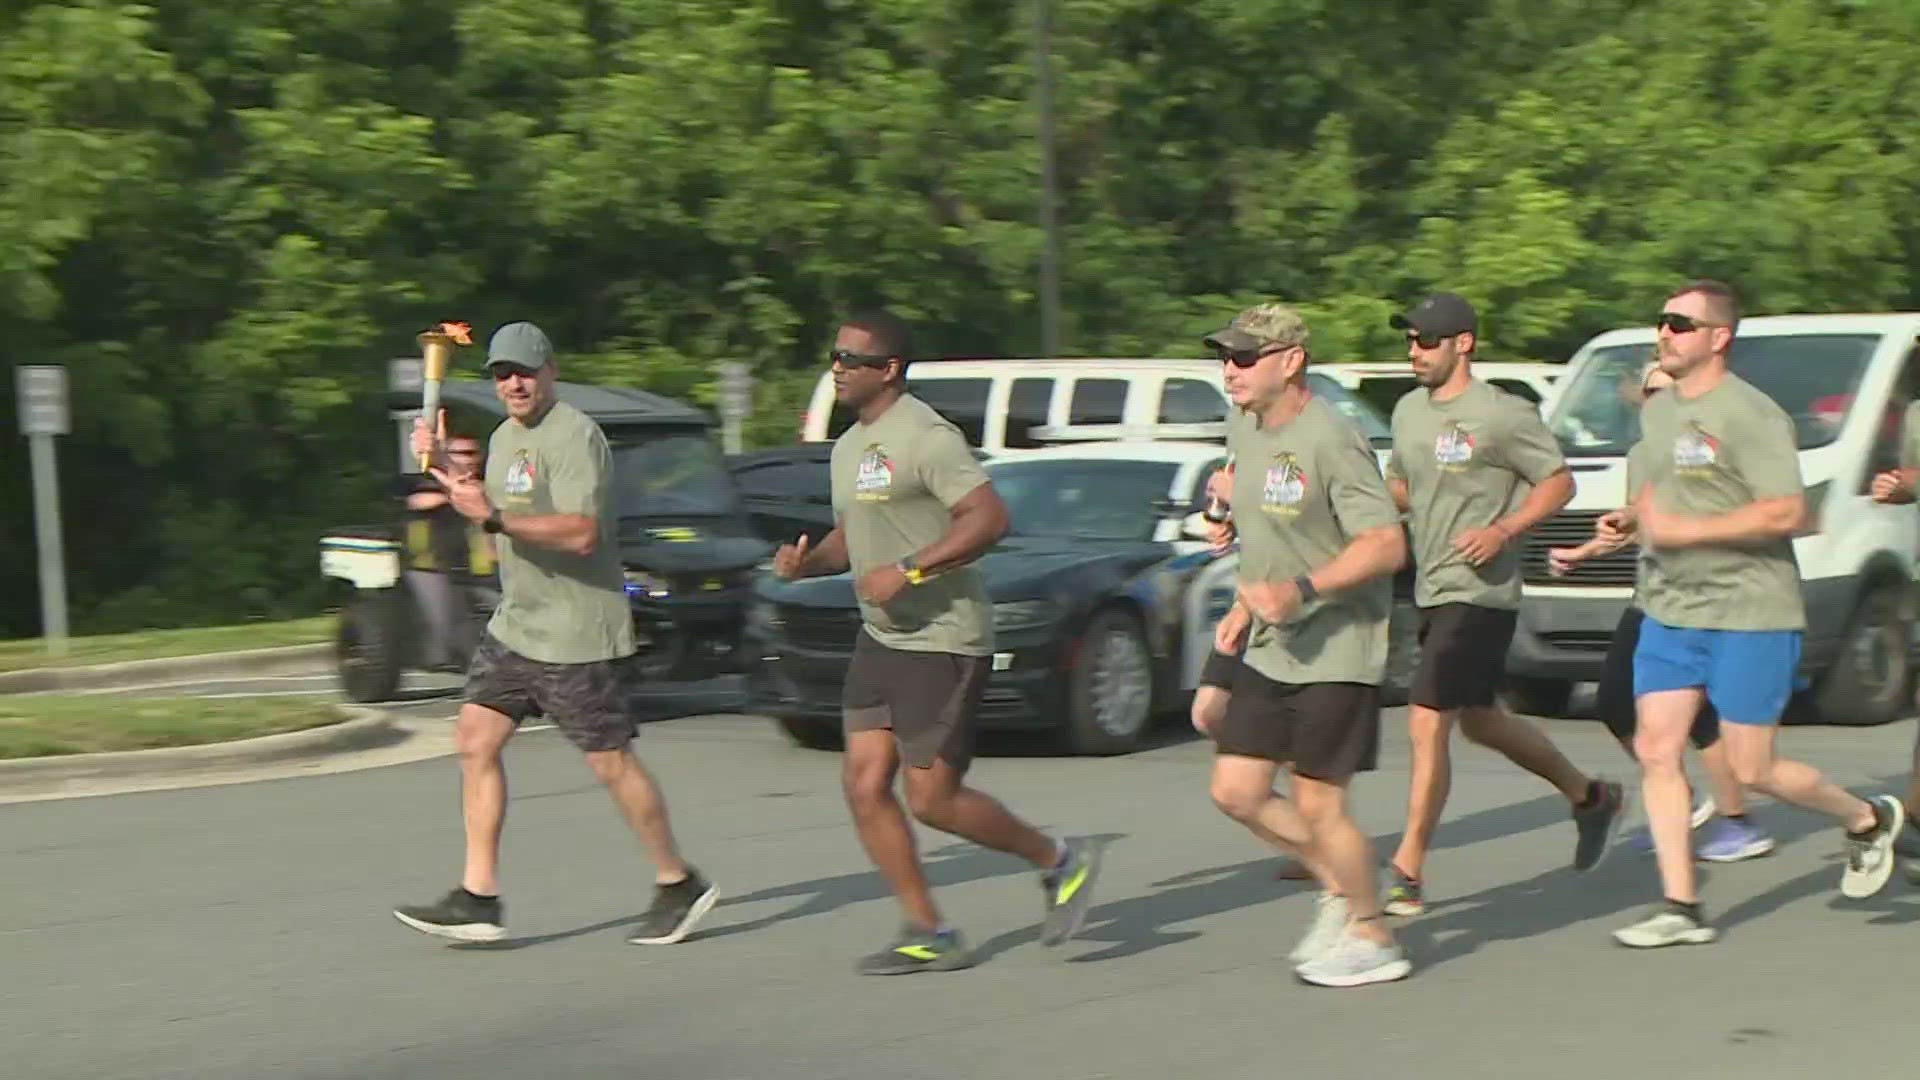 The High Point and Greensboro Police Departments talk about what it means for them to be a part of the run.